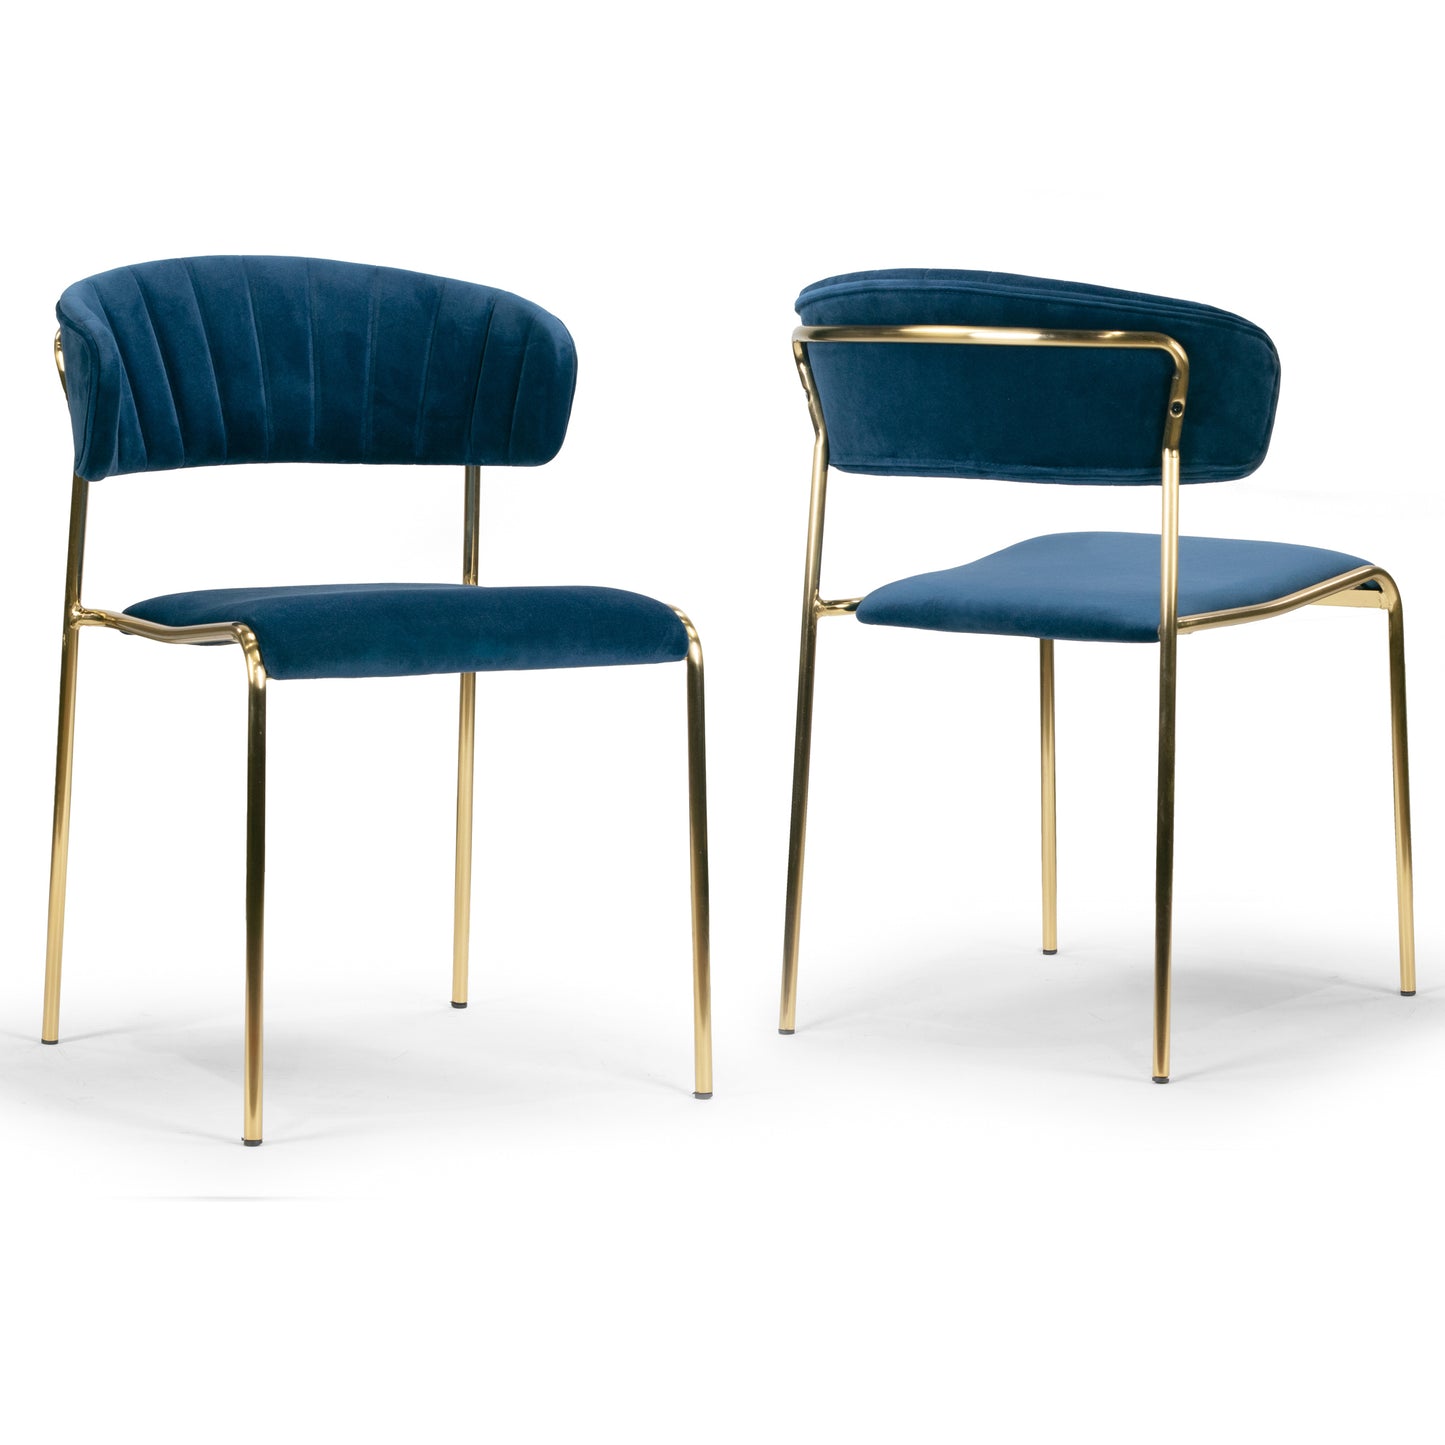 Set of 2 Andre Blue Velvet Dining Chair with Golden Metal Legs and Decorative Stitching